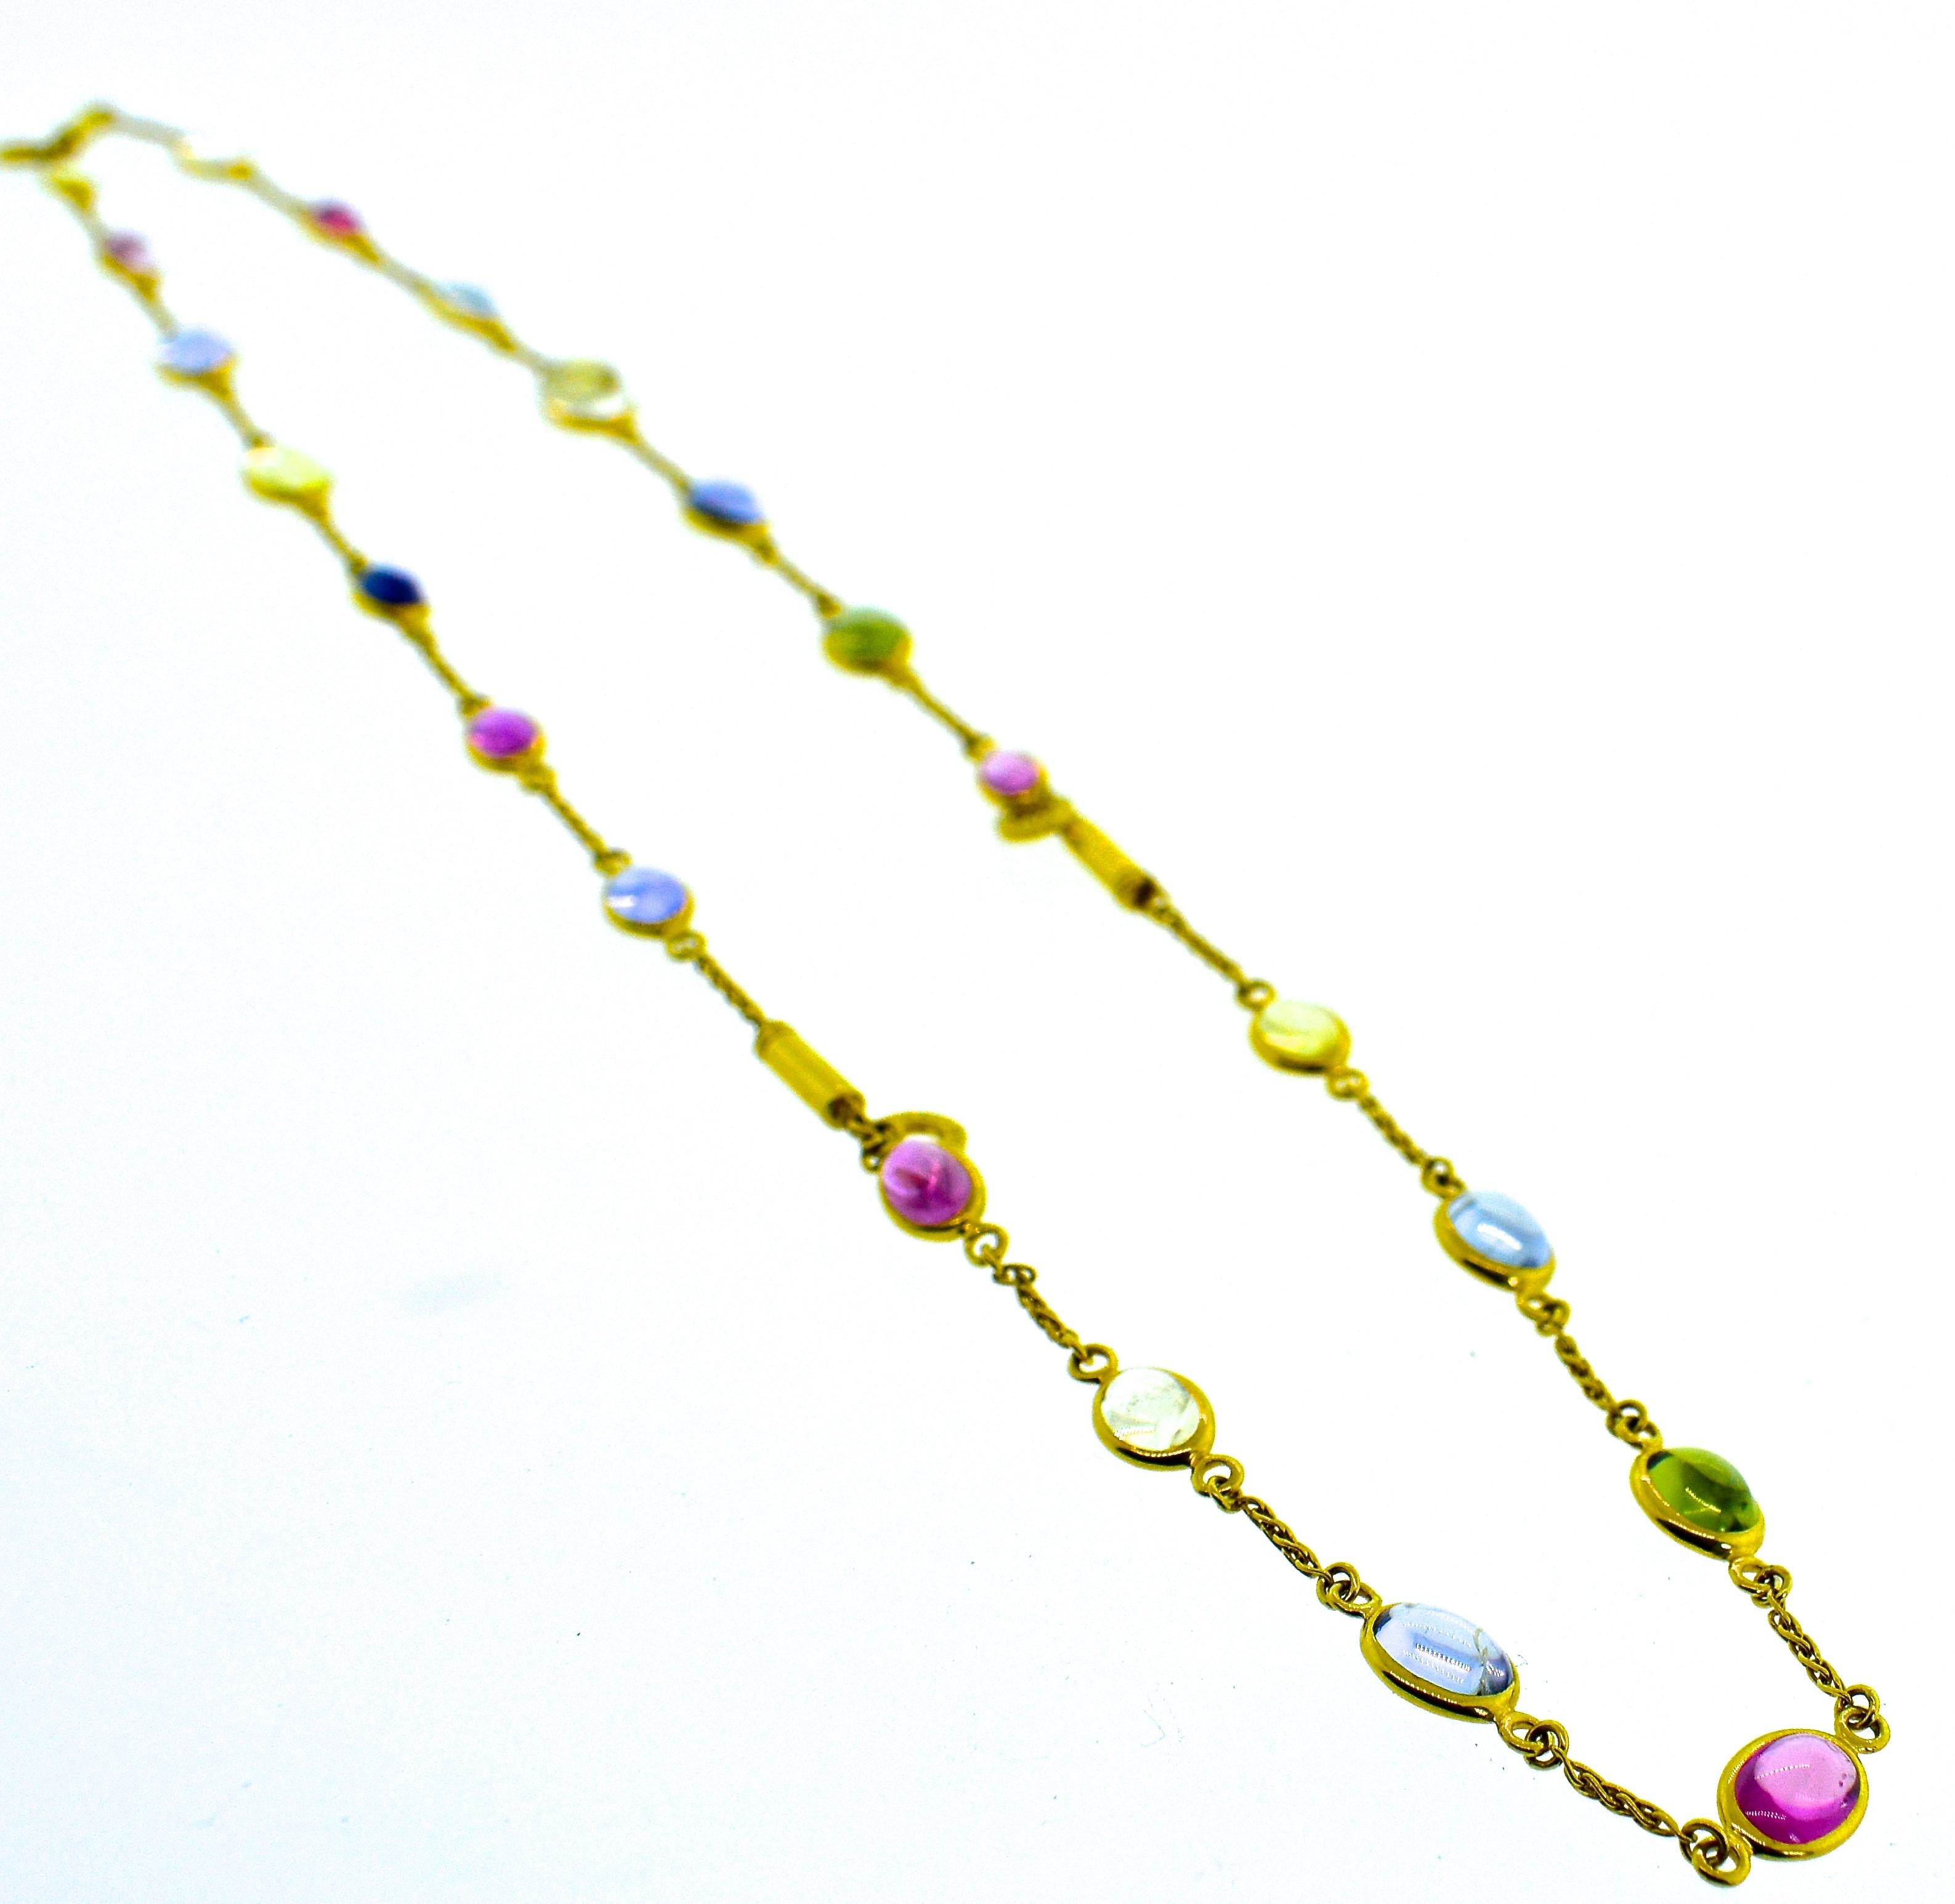 Bulgari multi color sapphire stones set in 18K.  This 18K yellow gold piece can be worn as a necklace and also as 3 bracelets - all just slightly more than 7 inches each.  There are 21 natural sapphires weighing approximately 35 cts.  Clasp the